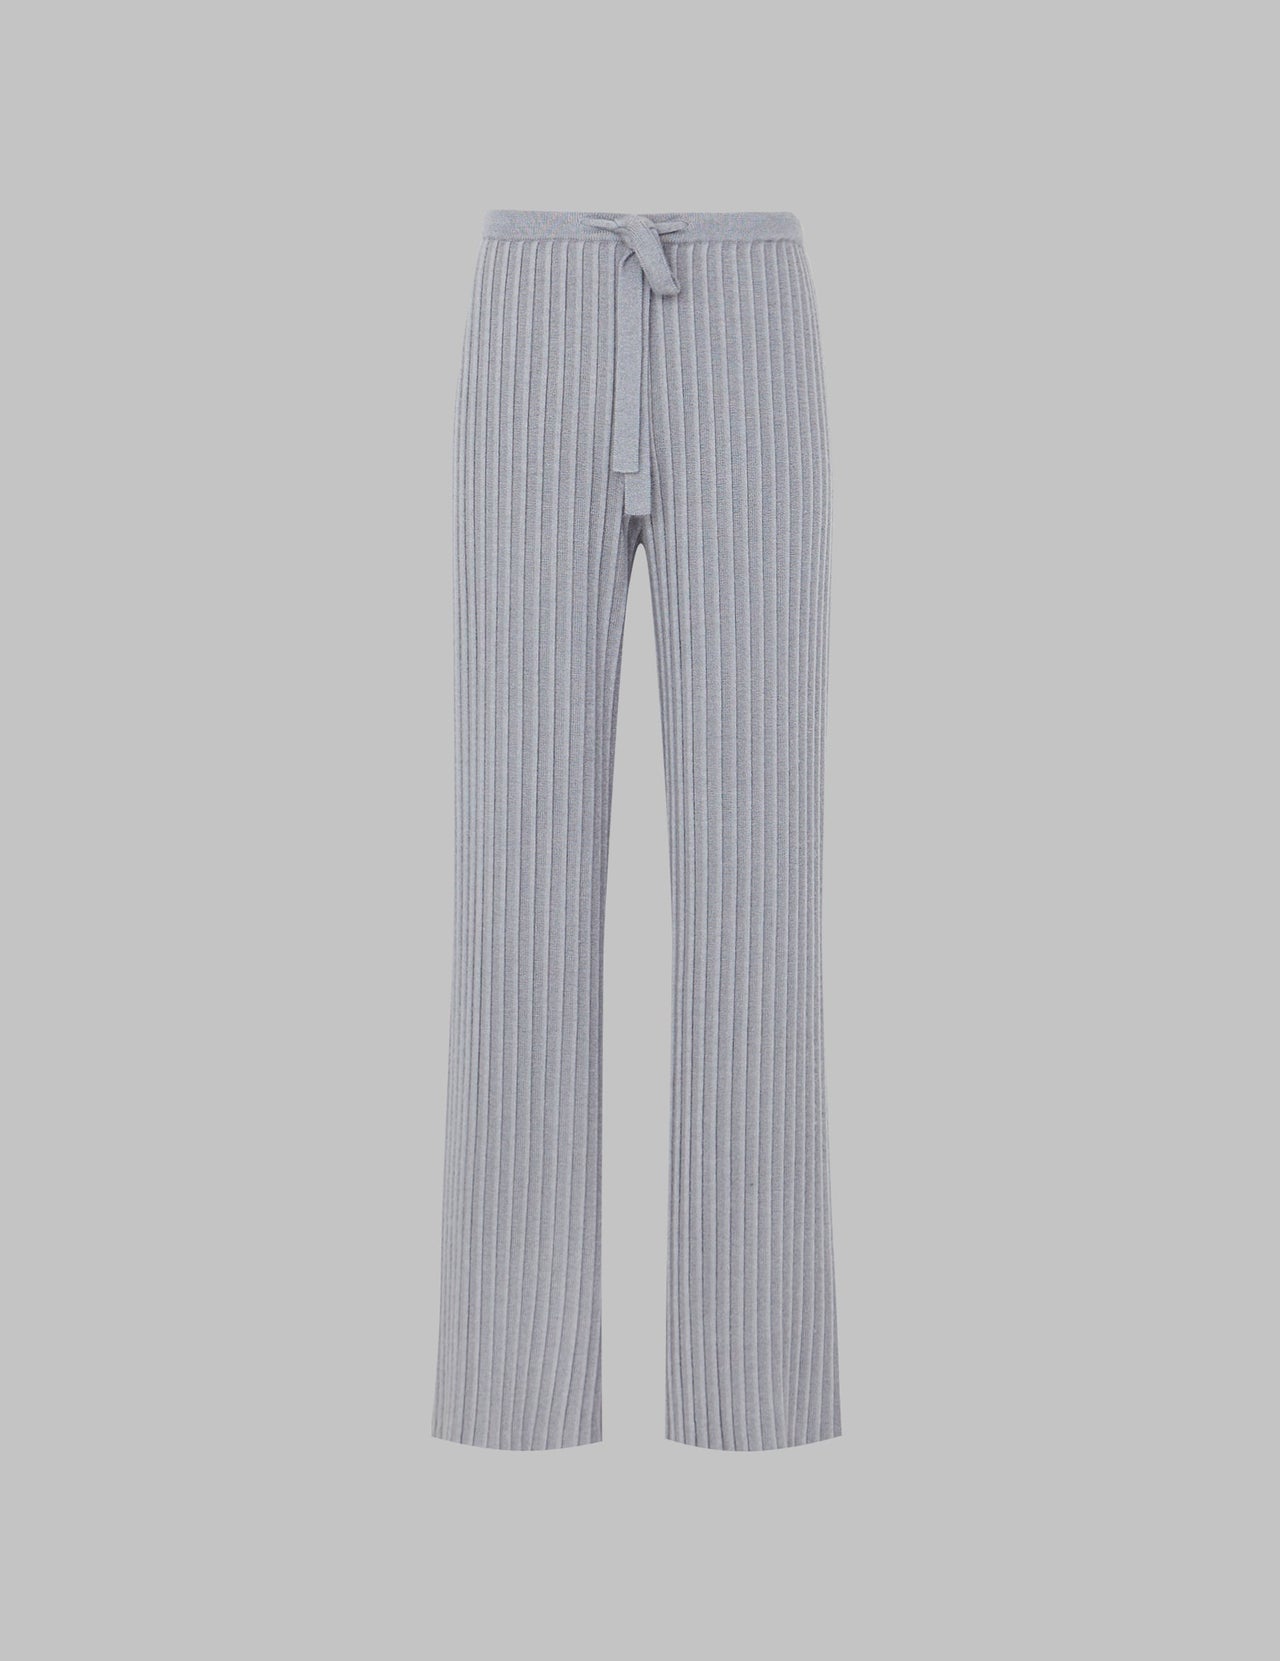  Grey Cashmere Pleated Trousers 